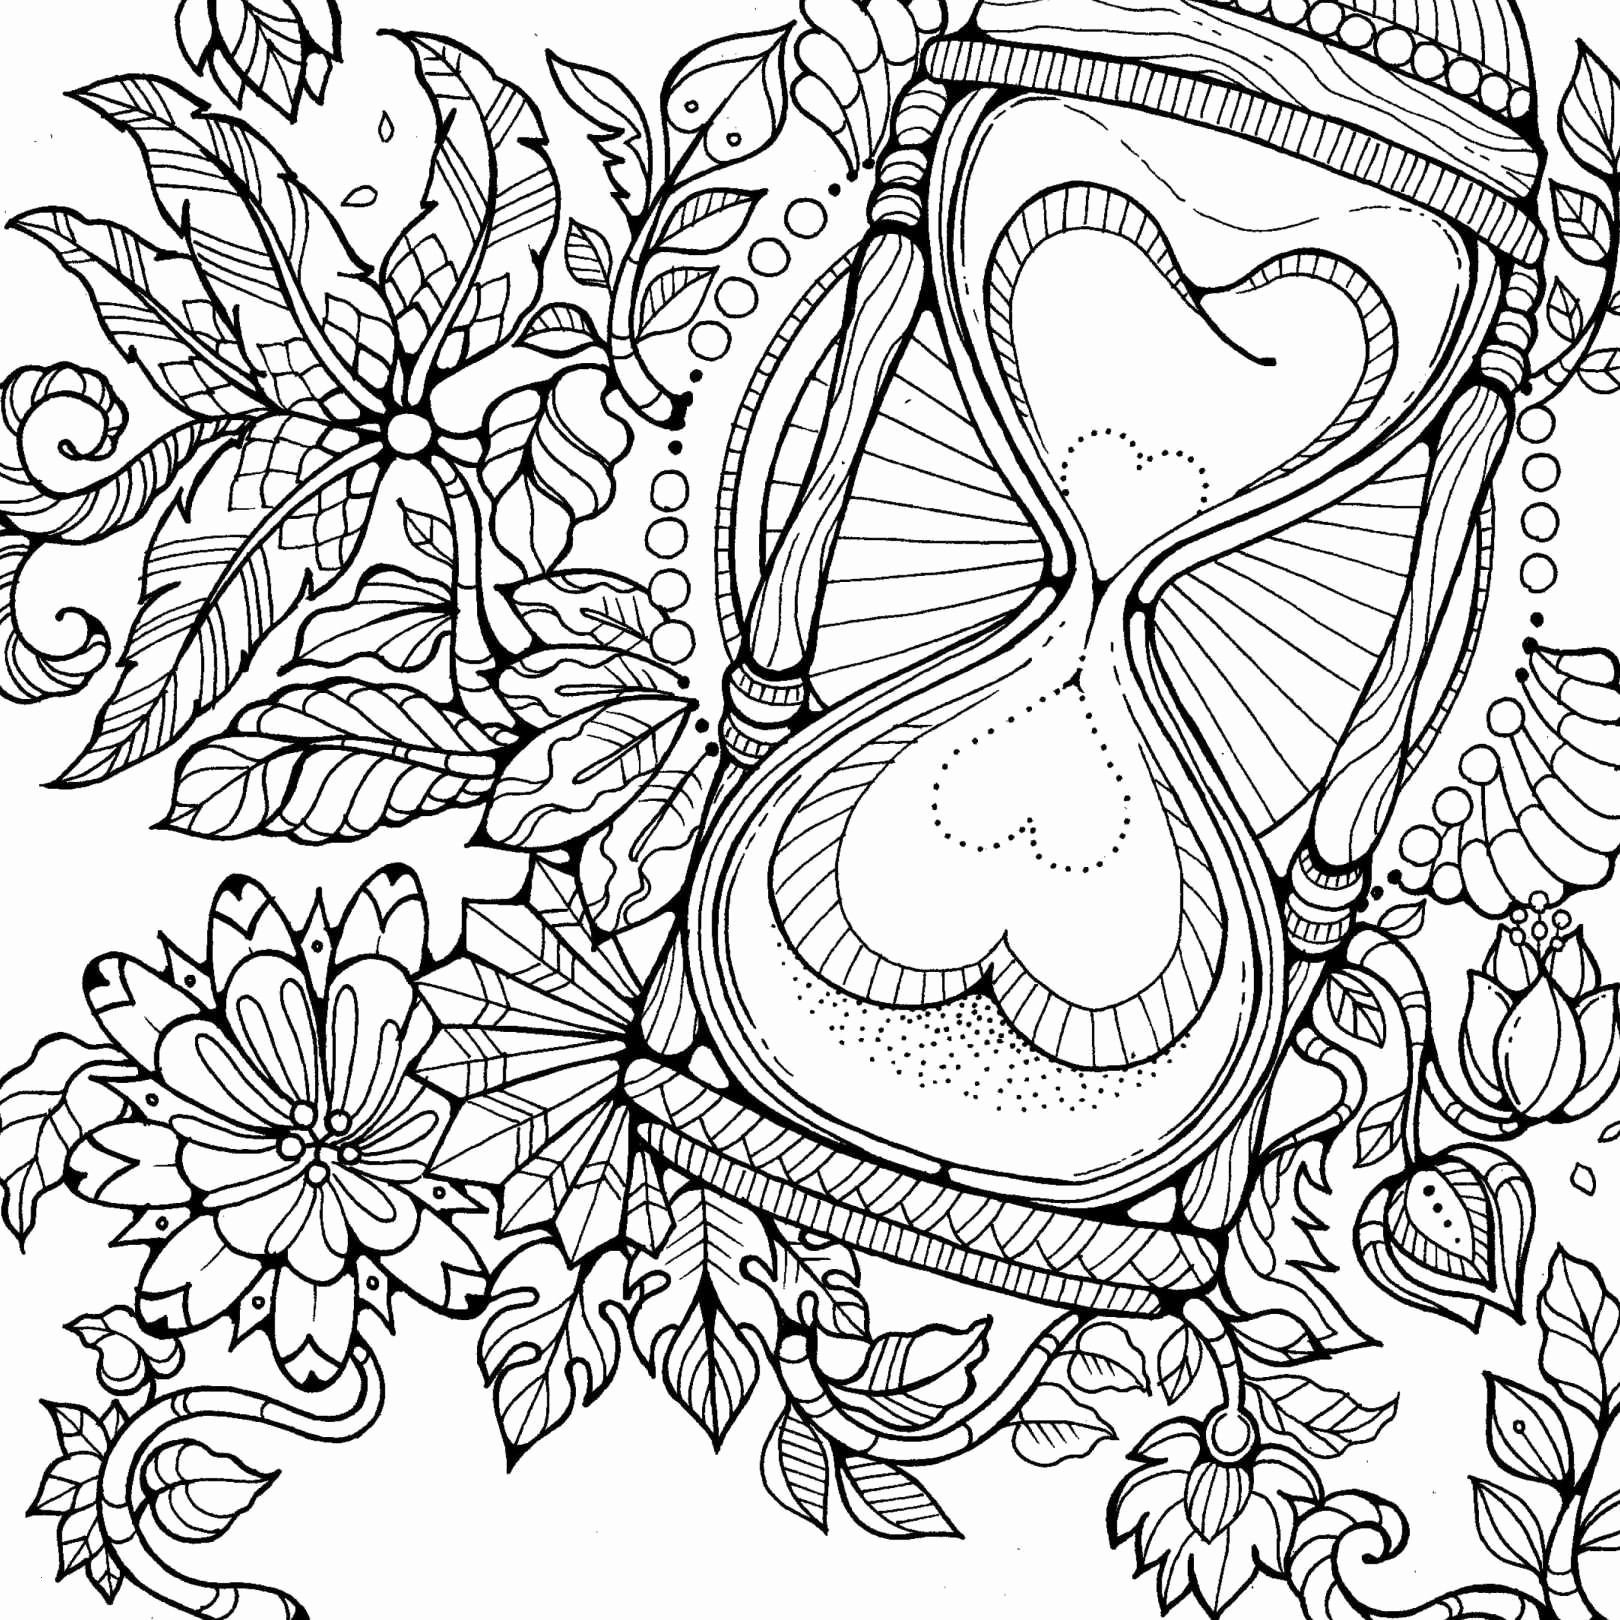 27 Stylish Fish In Flower Vase 2024 free download fish in flower vase of vases flower vase coloring page pages flowers in a top i 0d and pertaining to 0d and freehigh quality coloring fnaf coloring book best coloring book art luxury colorin